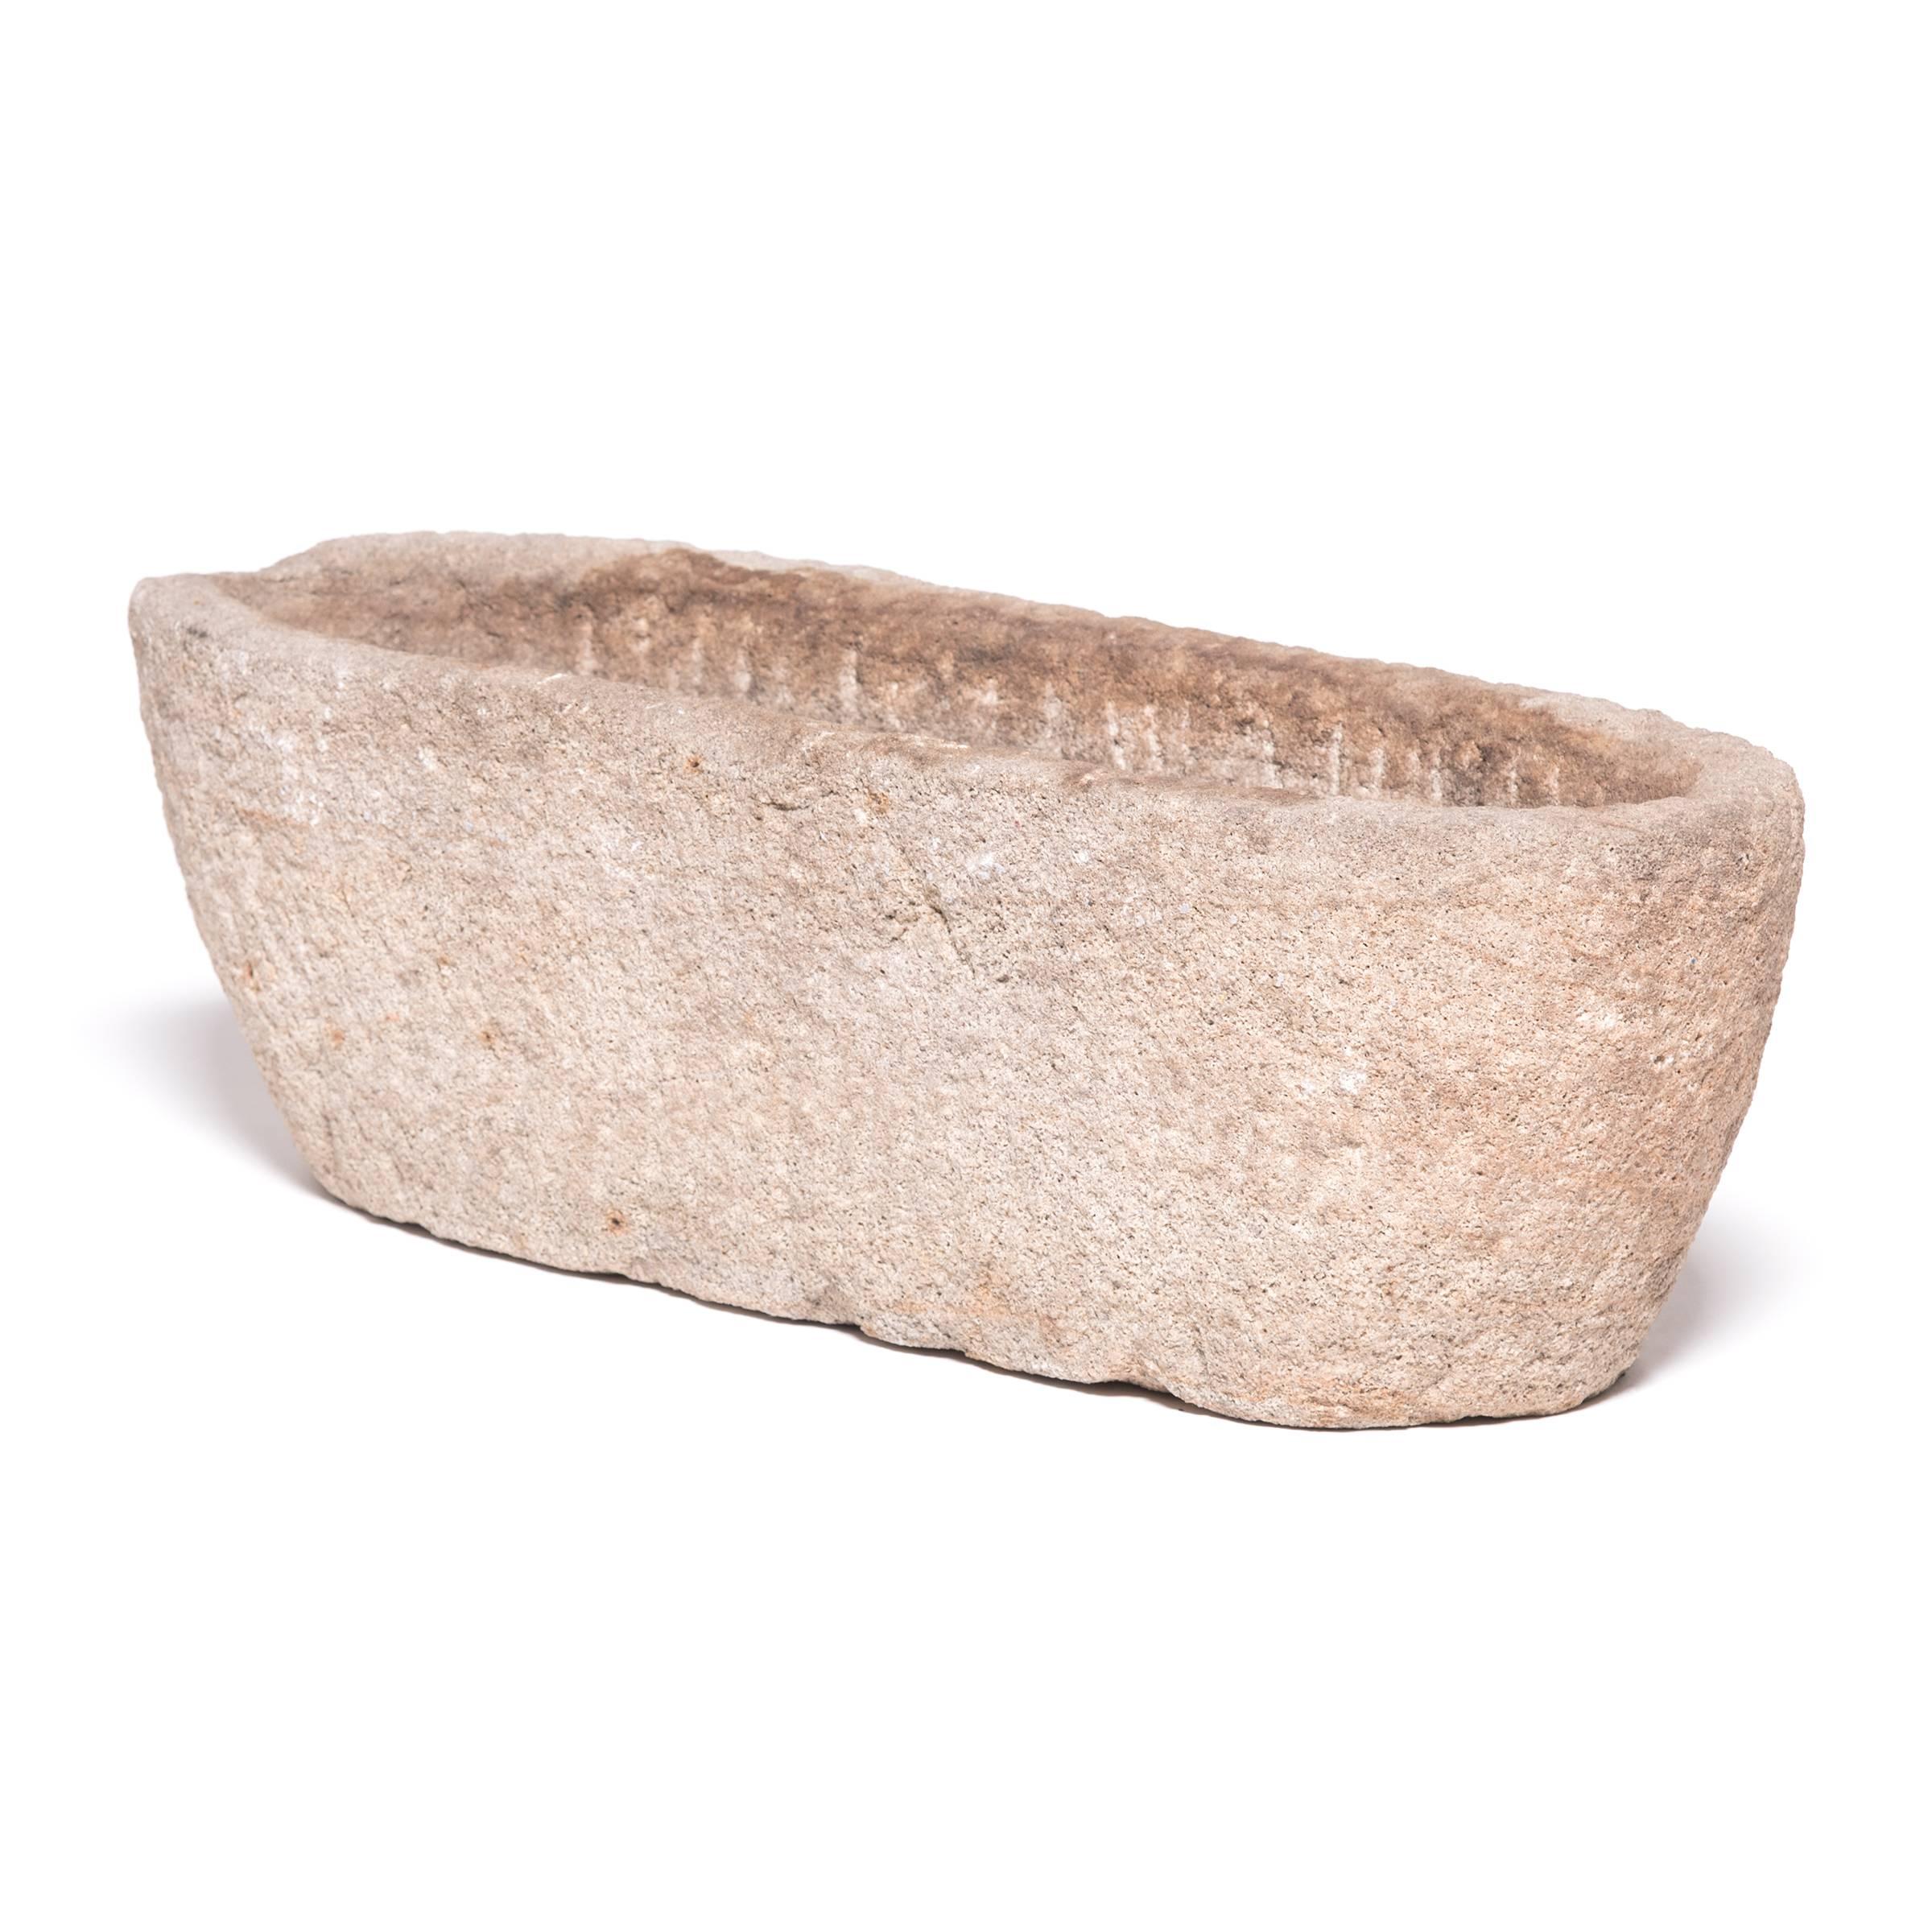 Once a common sight in courtyards throughout rural China, this textured stone trough was filled with grain for chickens and other barnyard fowl. Chiseled from a block of stone over a century ago, the deeply weathered vessel has endless stories to